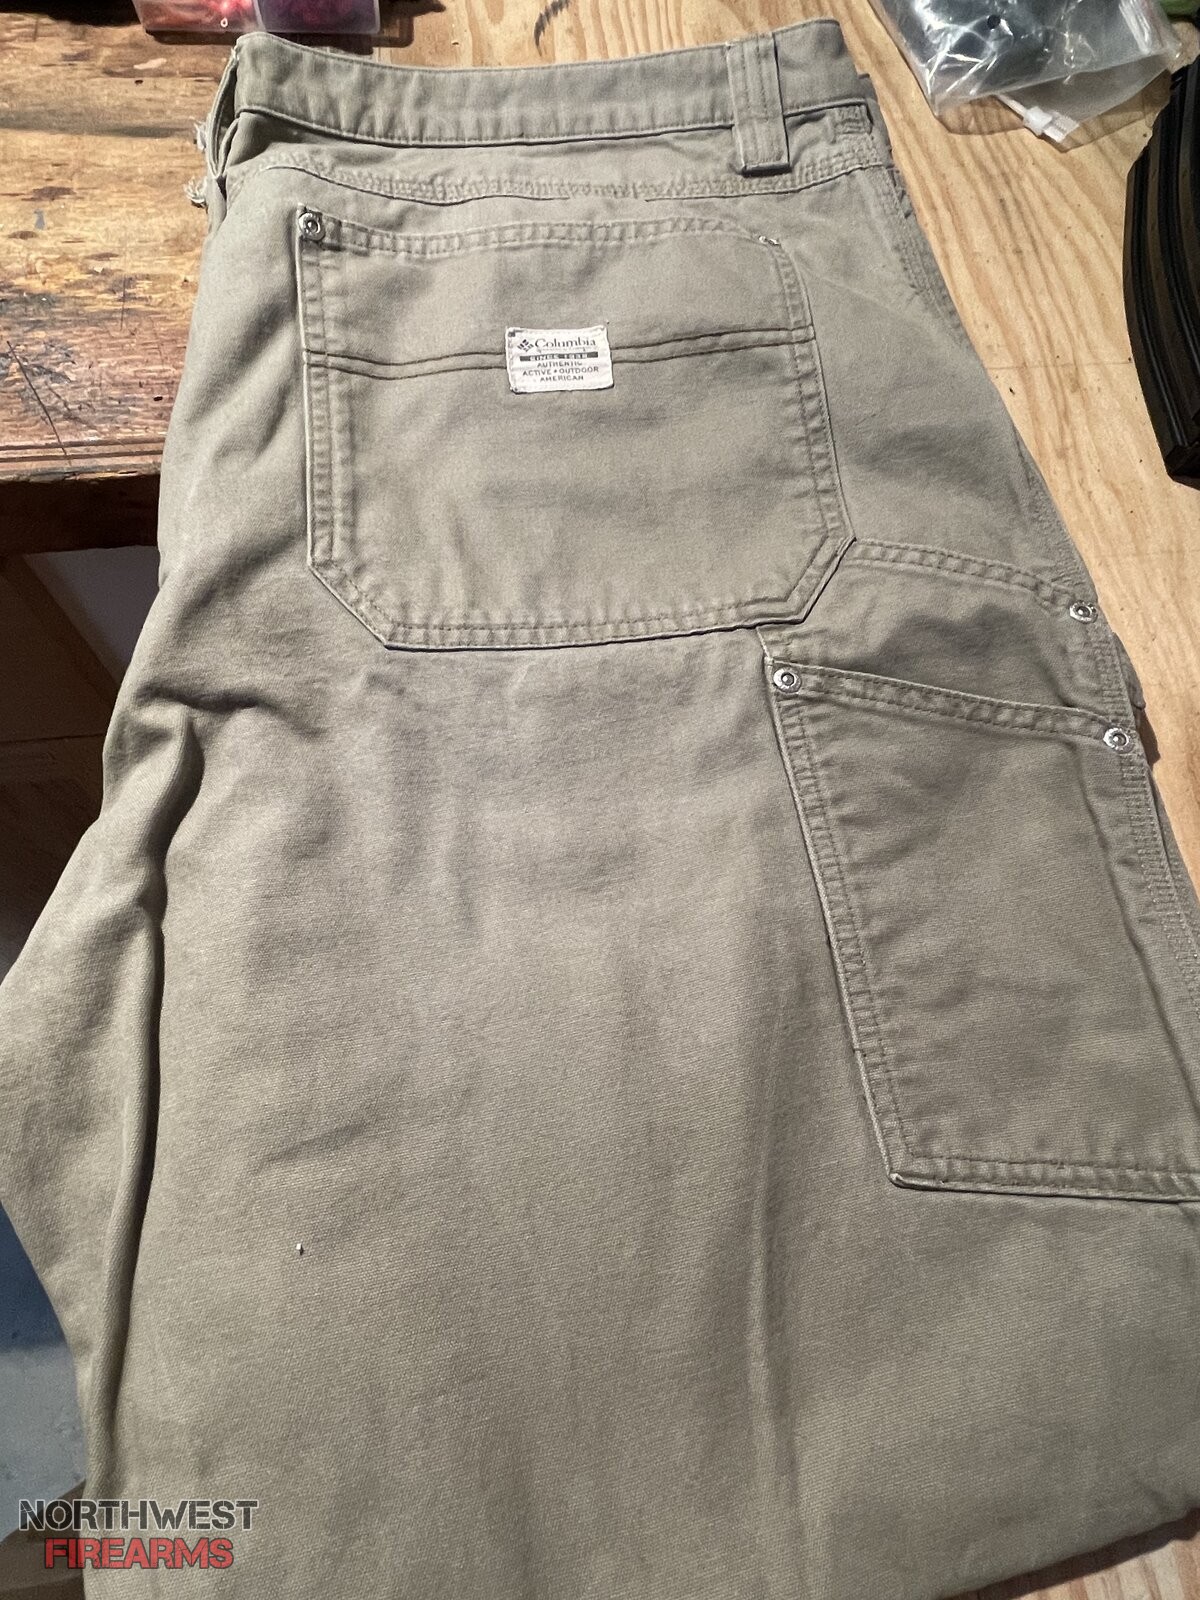 Mens Columbia and Carhartt pants | Northwest Firearms